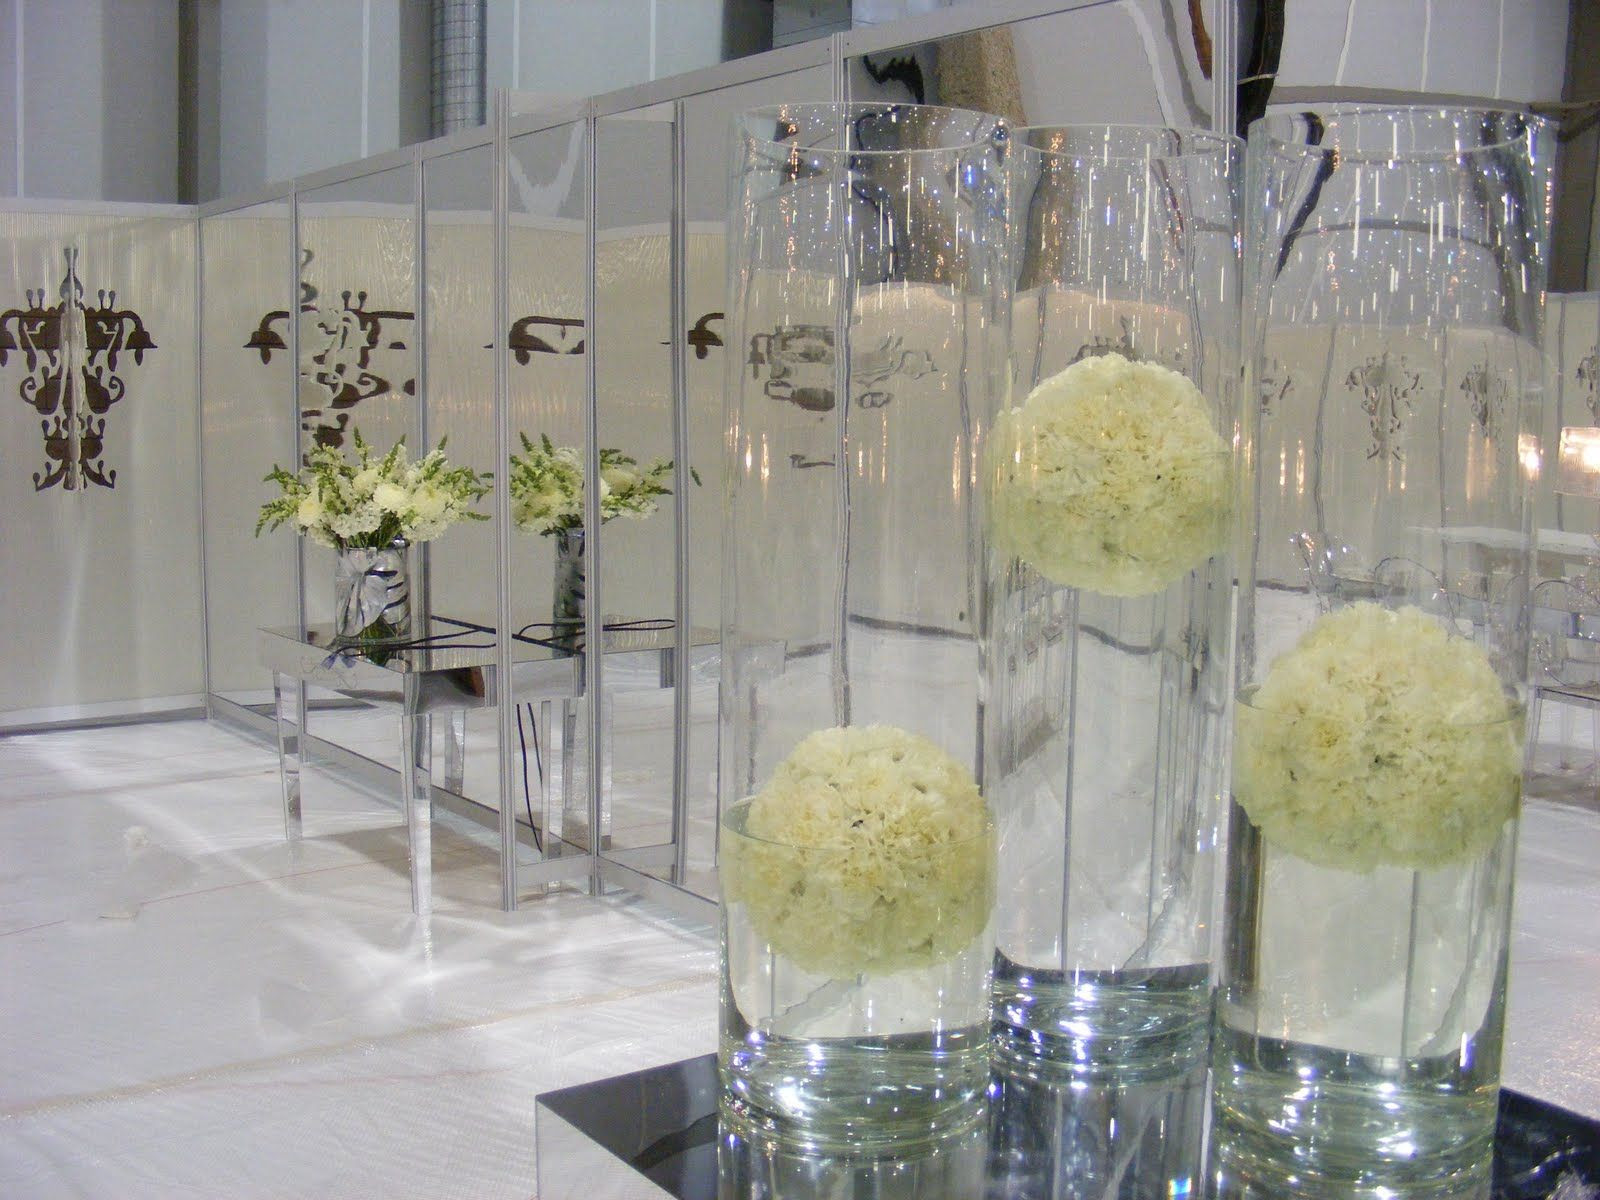 19 Unique Large Glass Ball Vase 2022 free download large glass ball vase of we featured a trio of floating white flower balls in large glass with we featured a trio of floating white flower balls in large glass cylinder vases for a sleek mod